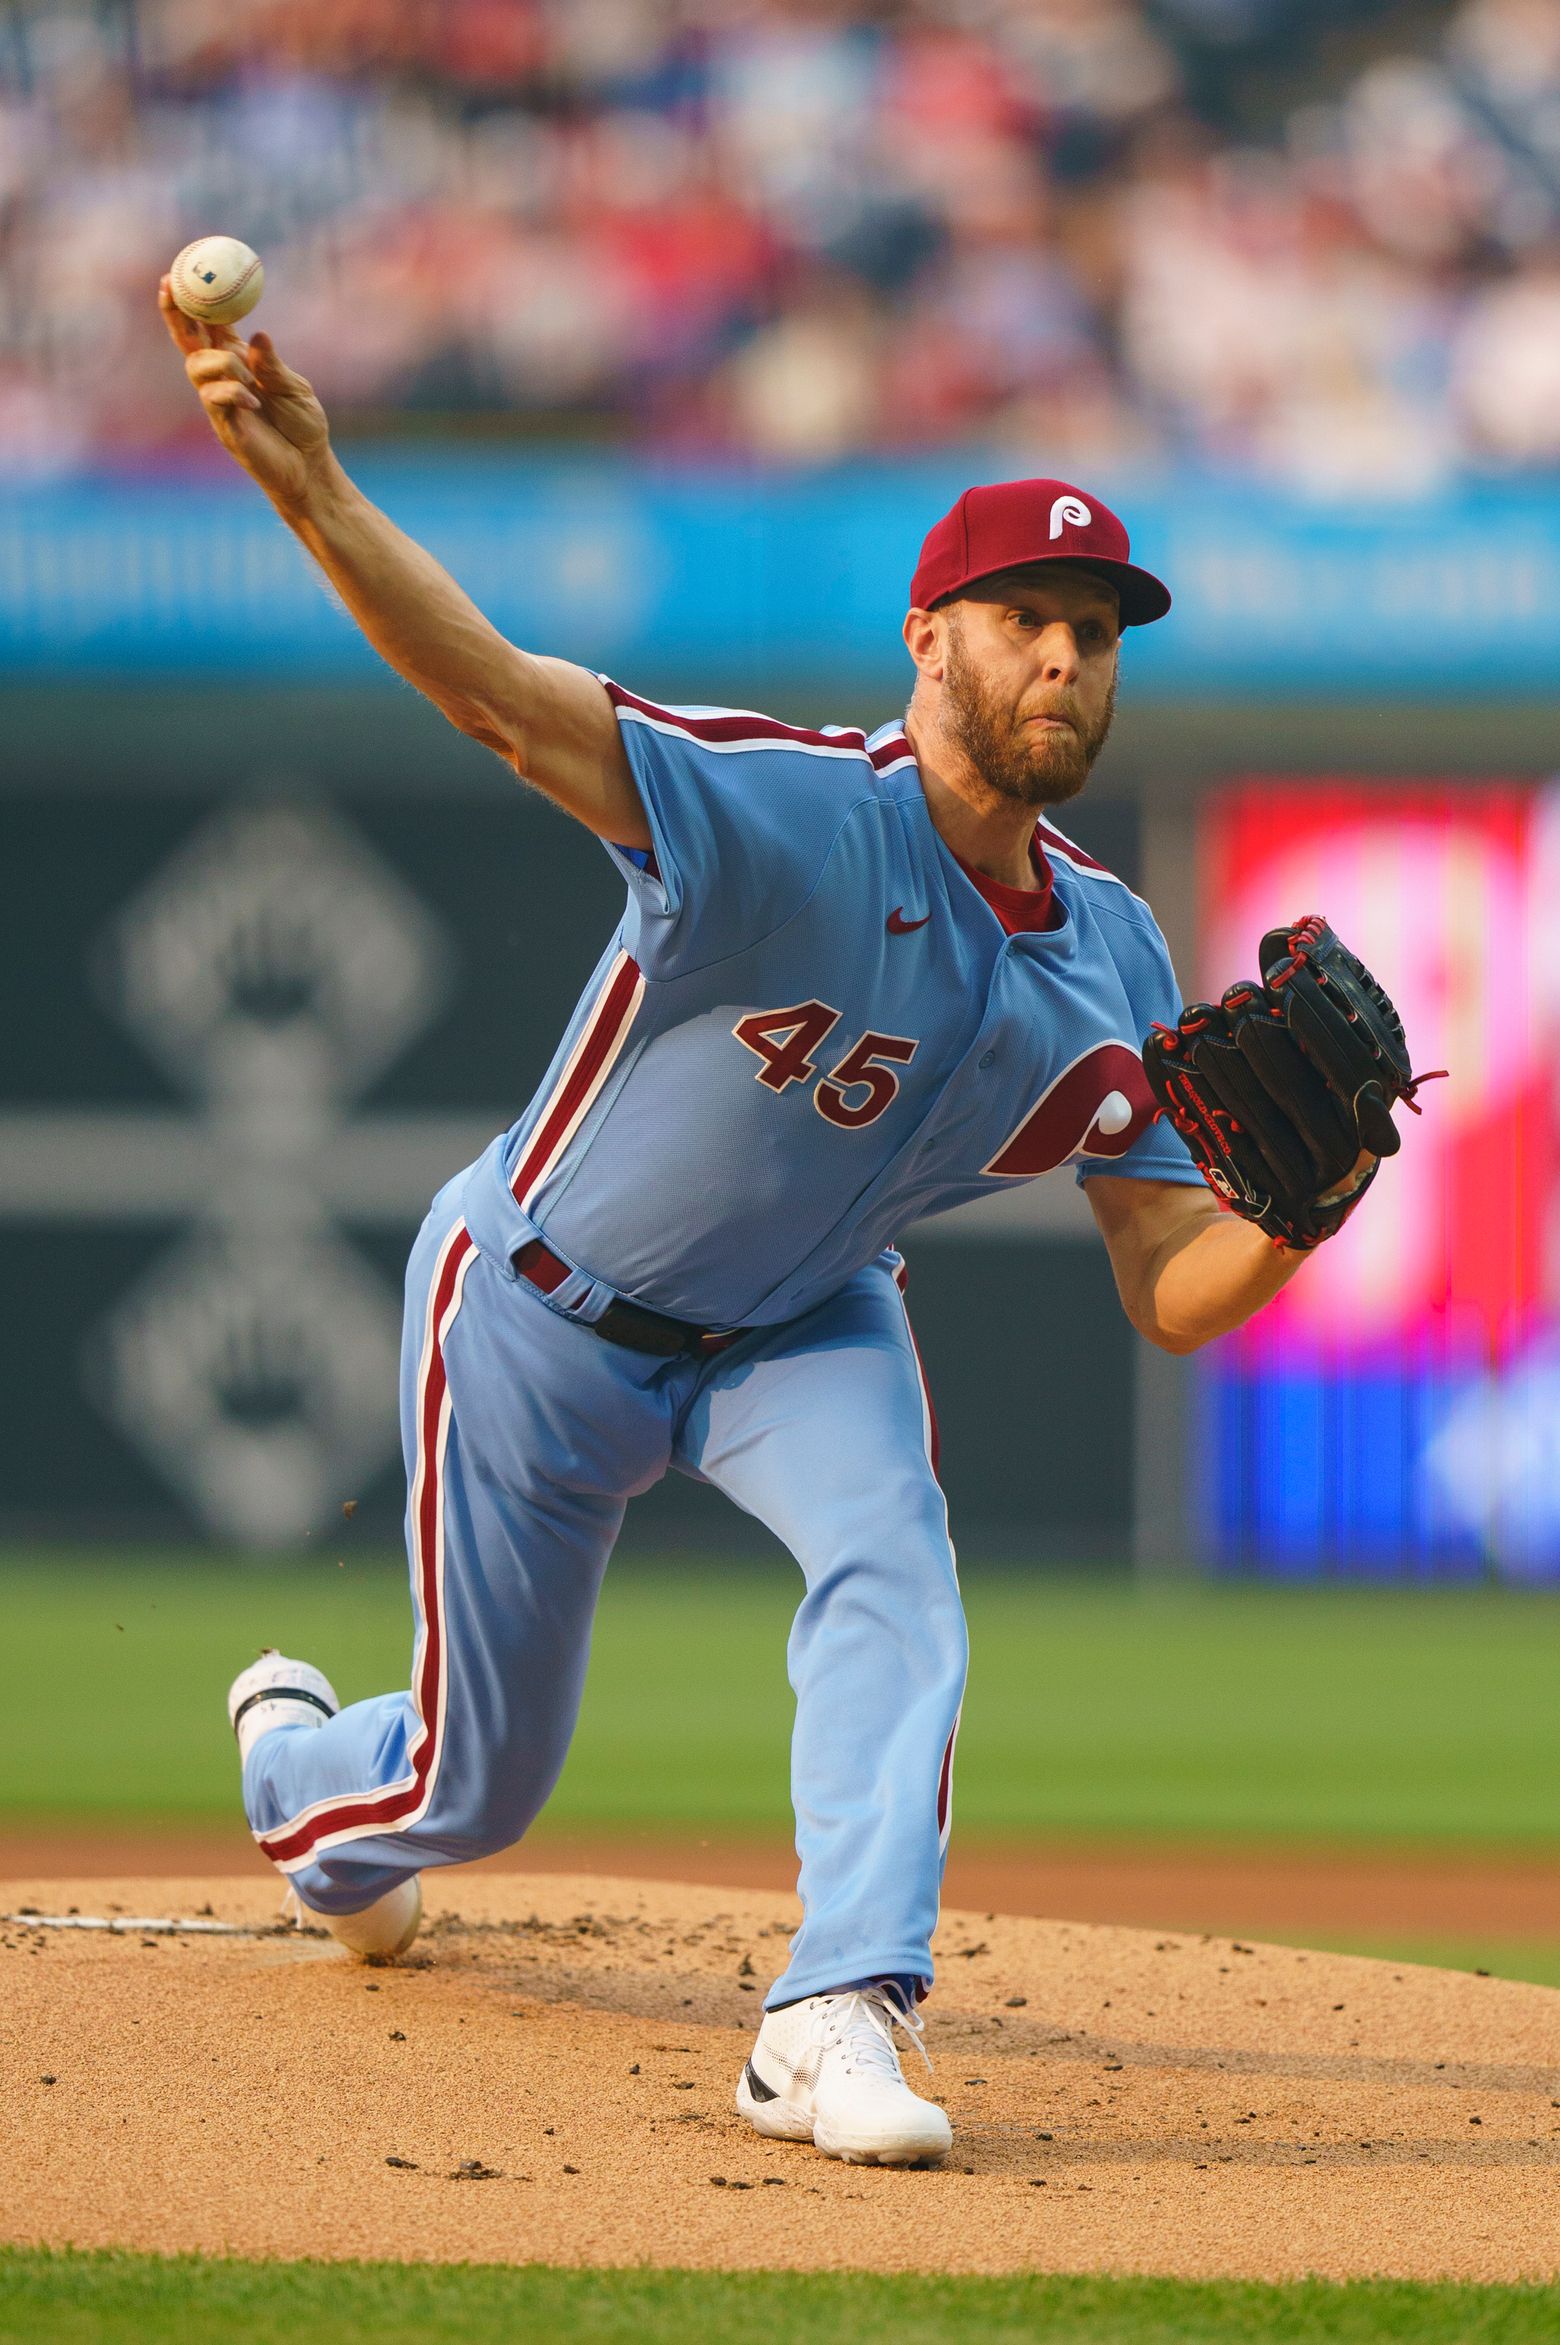 Wheeler working on no-hitter for Phillies through 7 innings against Tigers